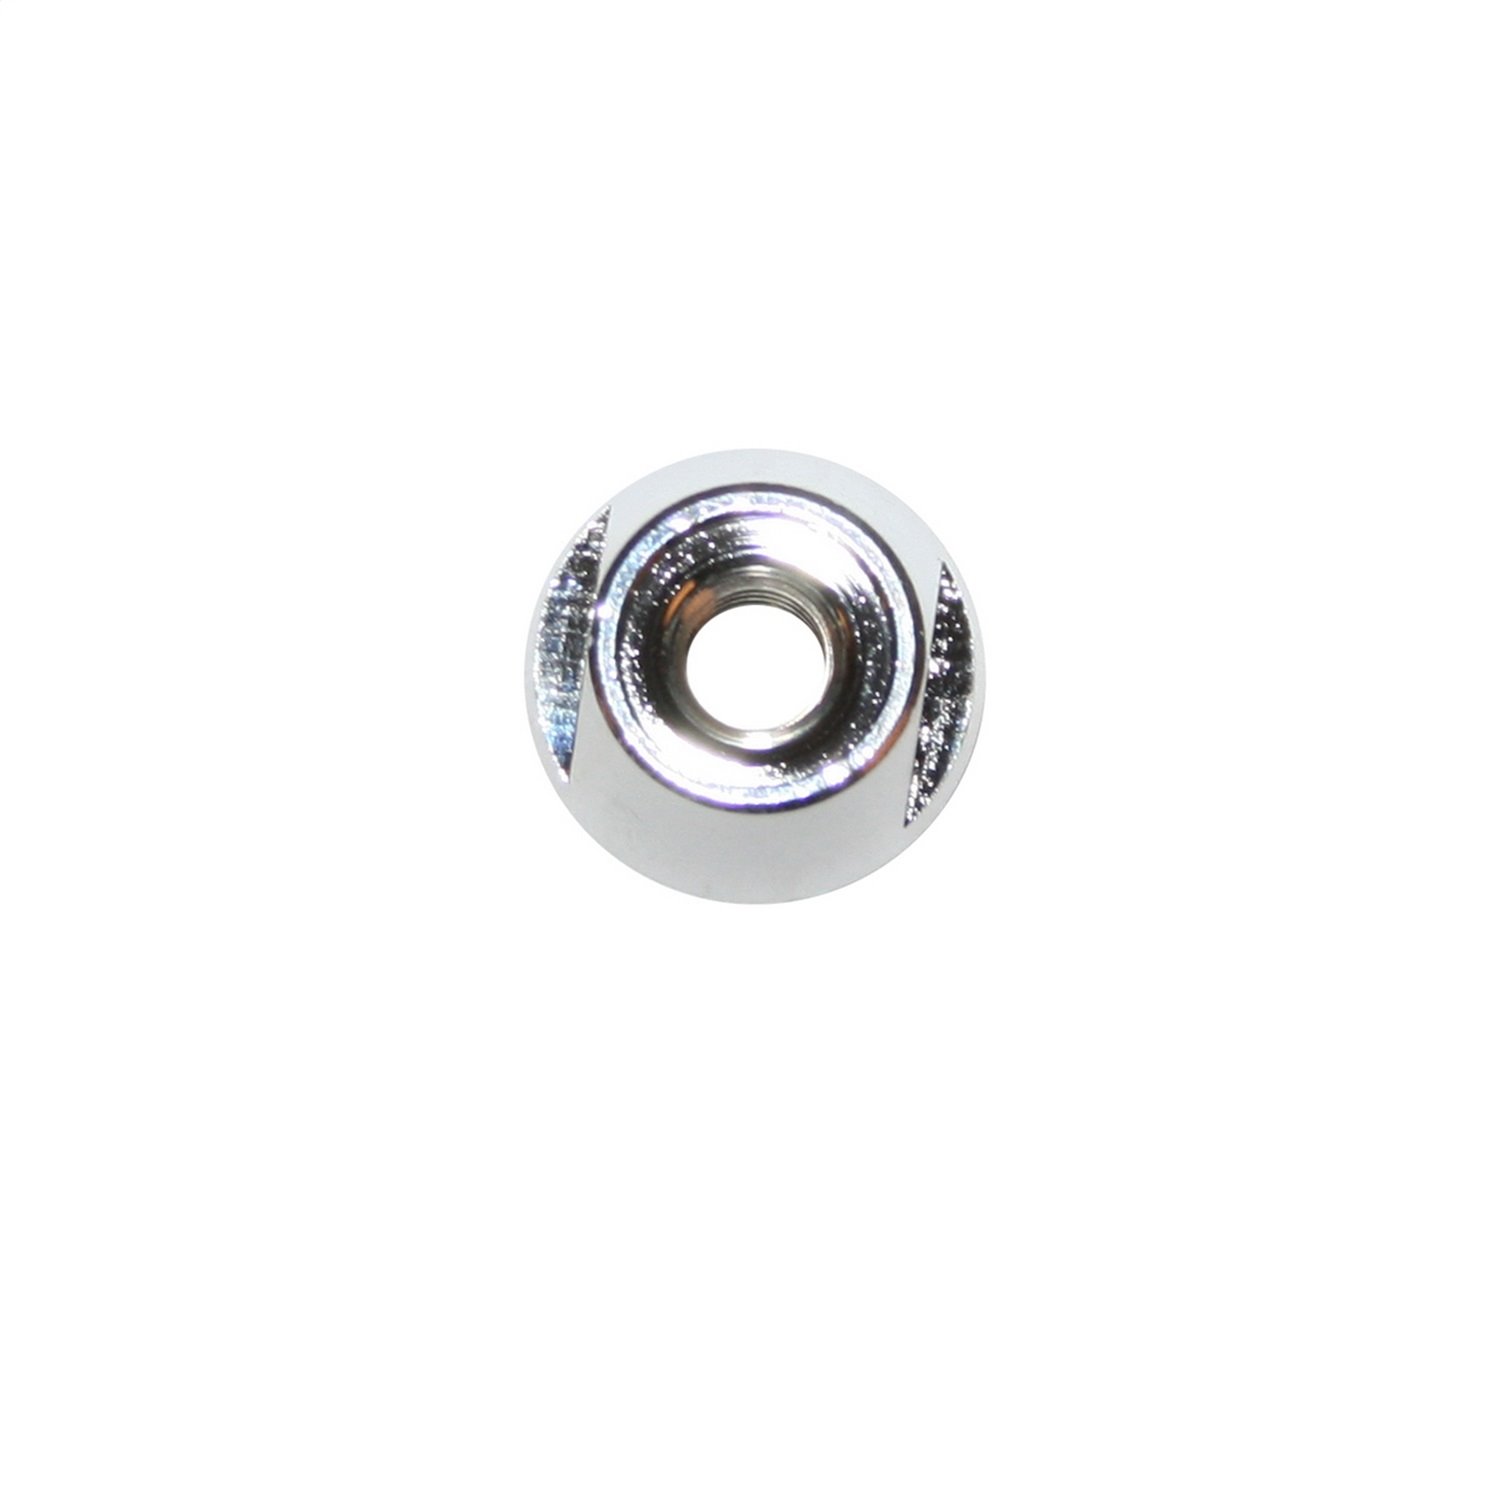 Replacement shift knob lock nut, Fits 80-86 Jeep CJs with Dana 300 transfer case and a T-4 T-5 T-176 or T-177 transmission.